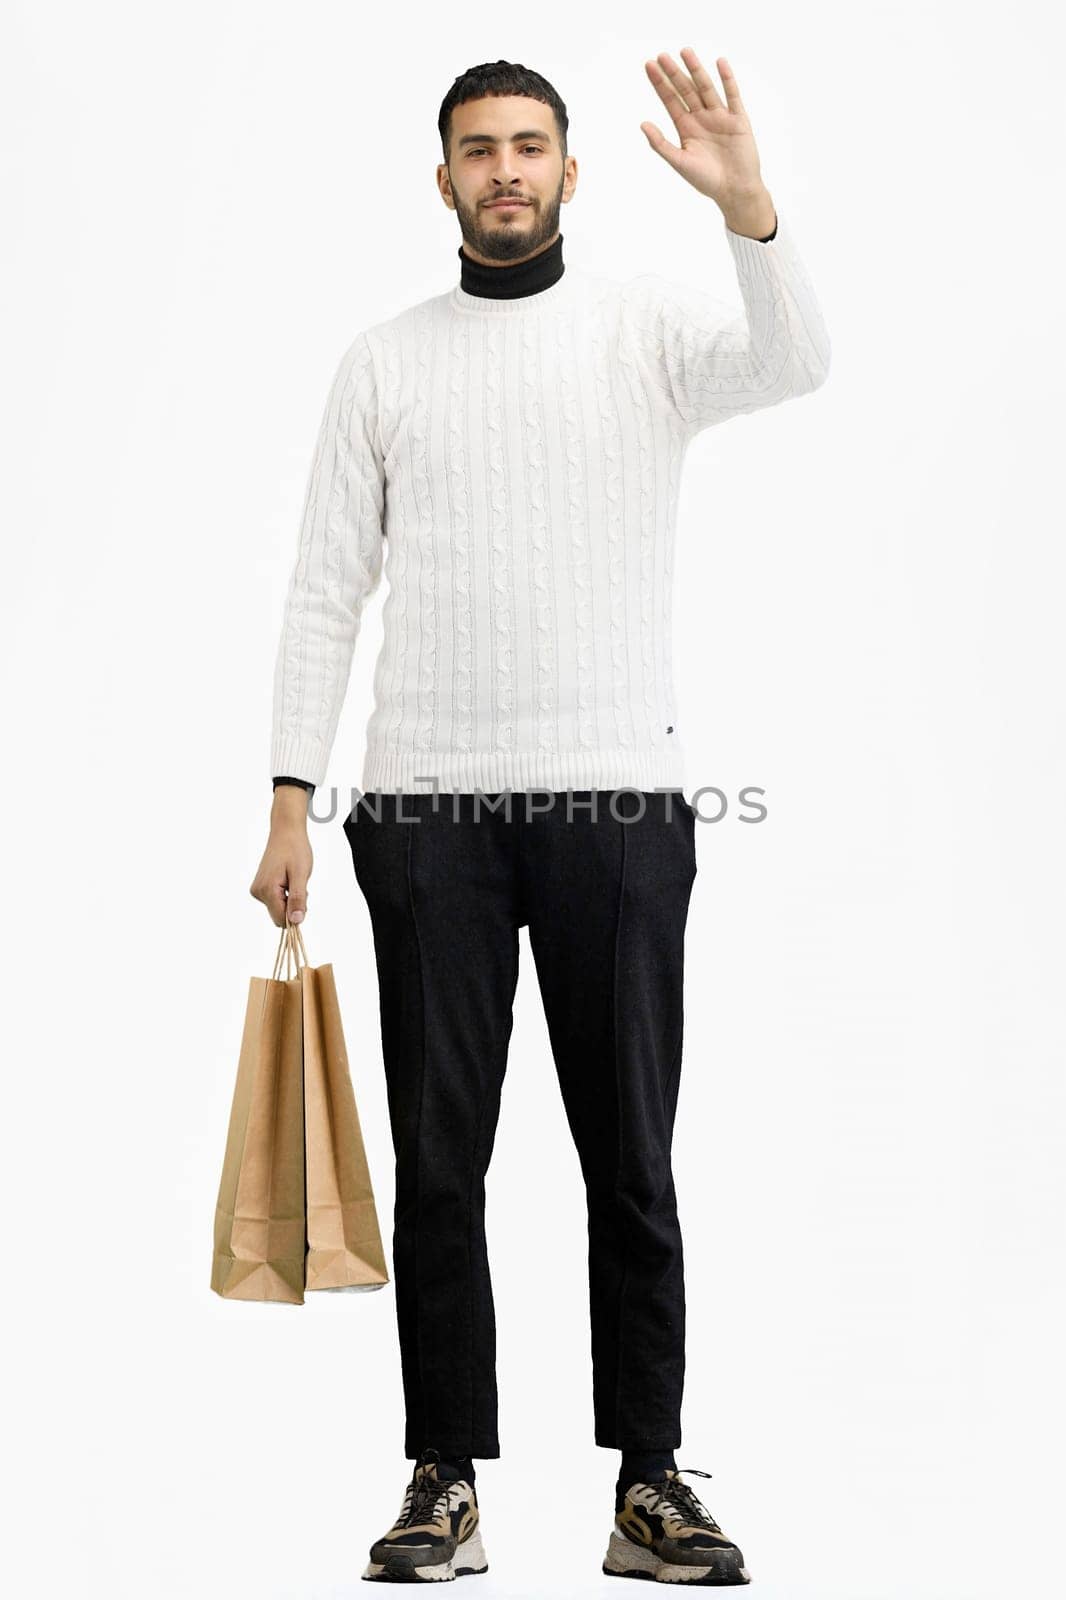 A man, full-length, on a white background, with bags, waving his hand.